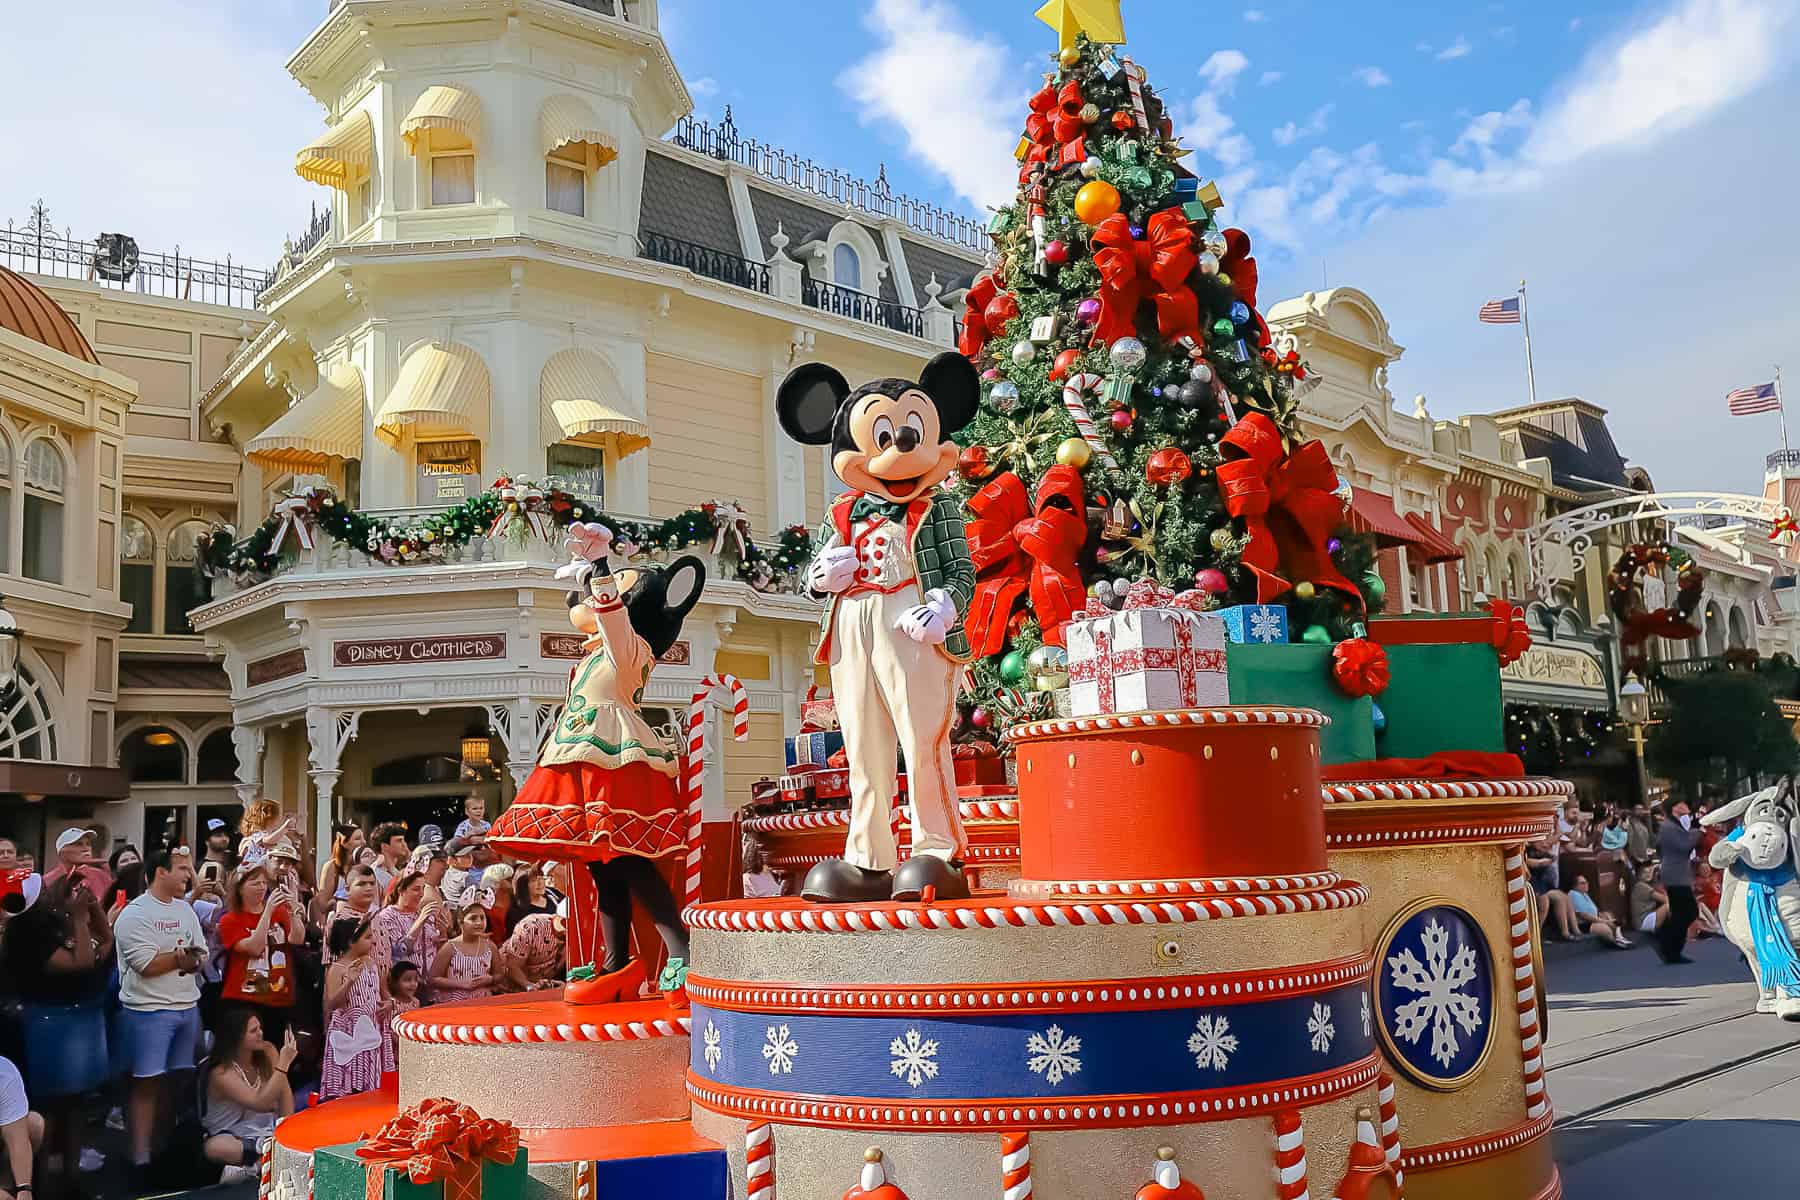 Mickey and Minnie with float details, including a Christmas tree, presents, and miniature train set. 